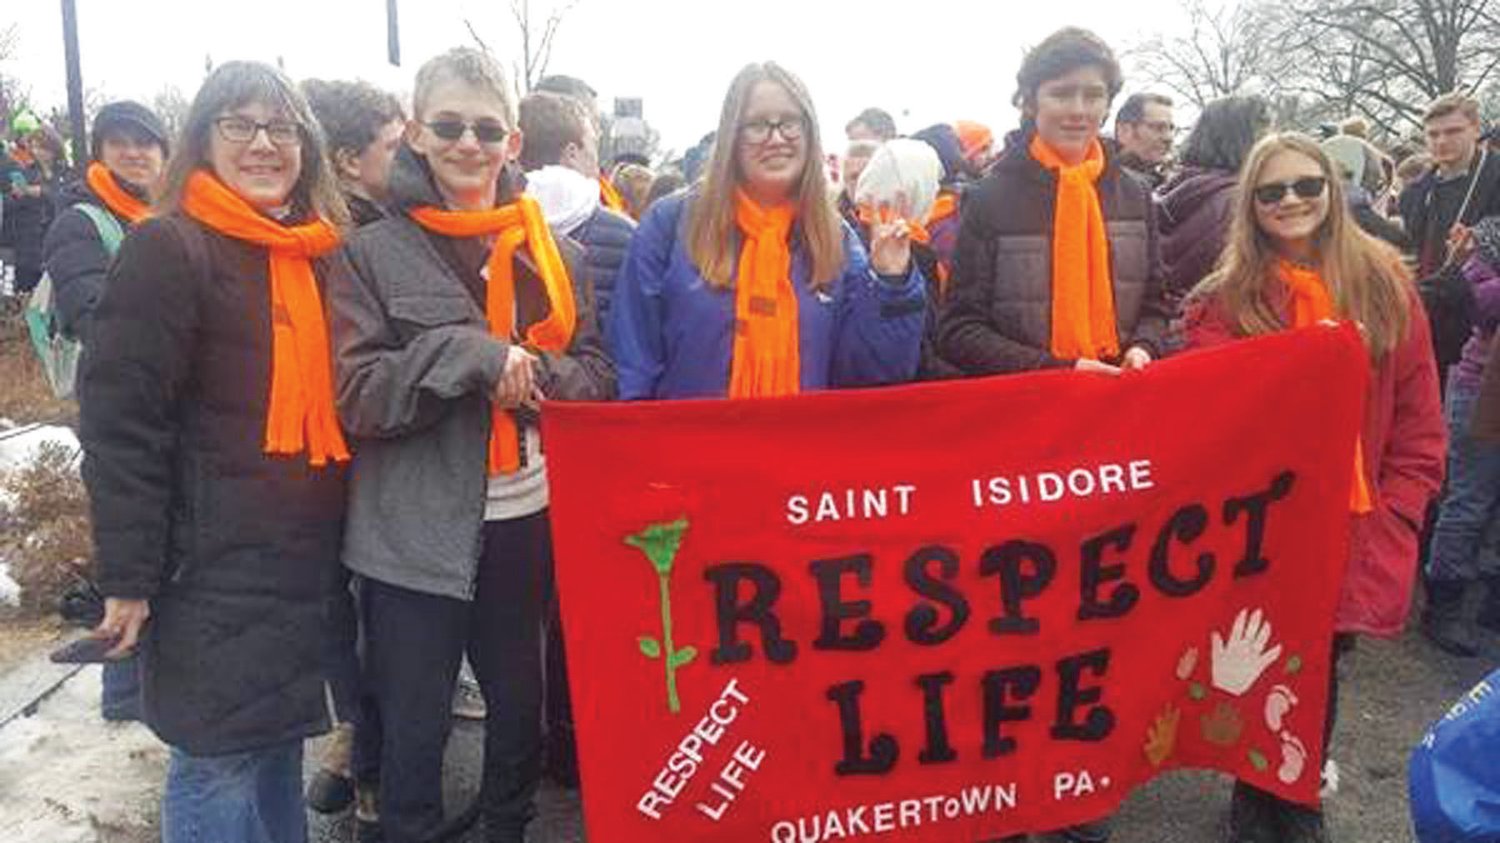 Above: Students from St. Isidore in Quakertown take part in the recent March for Life in Washington, D.C. Below: Marchers gather outside the U.S. Supreme Court.